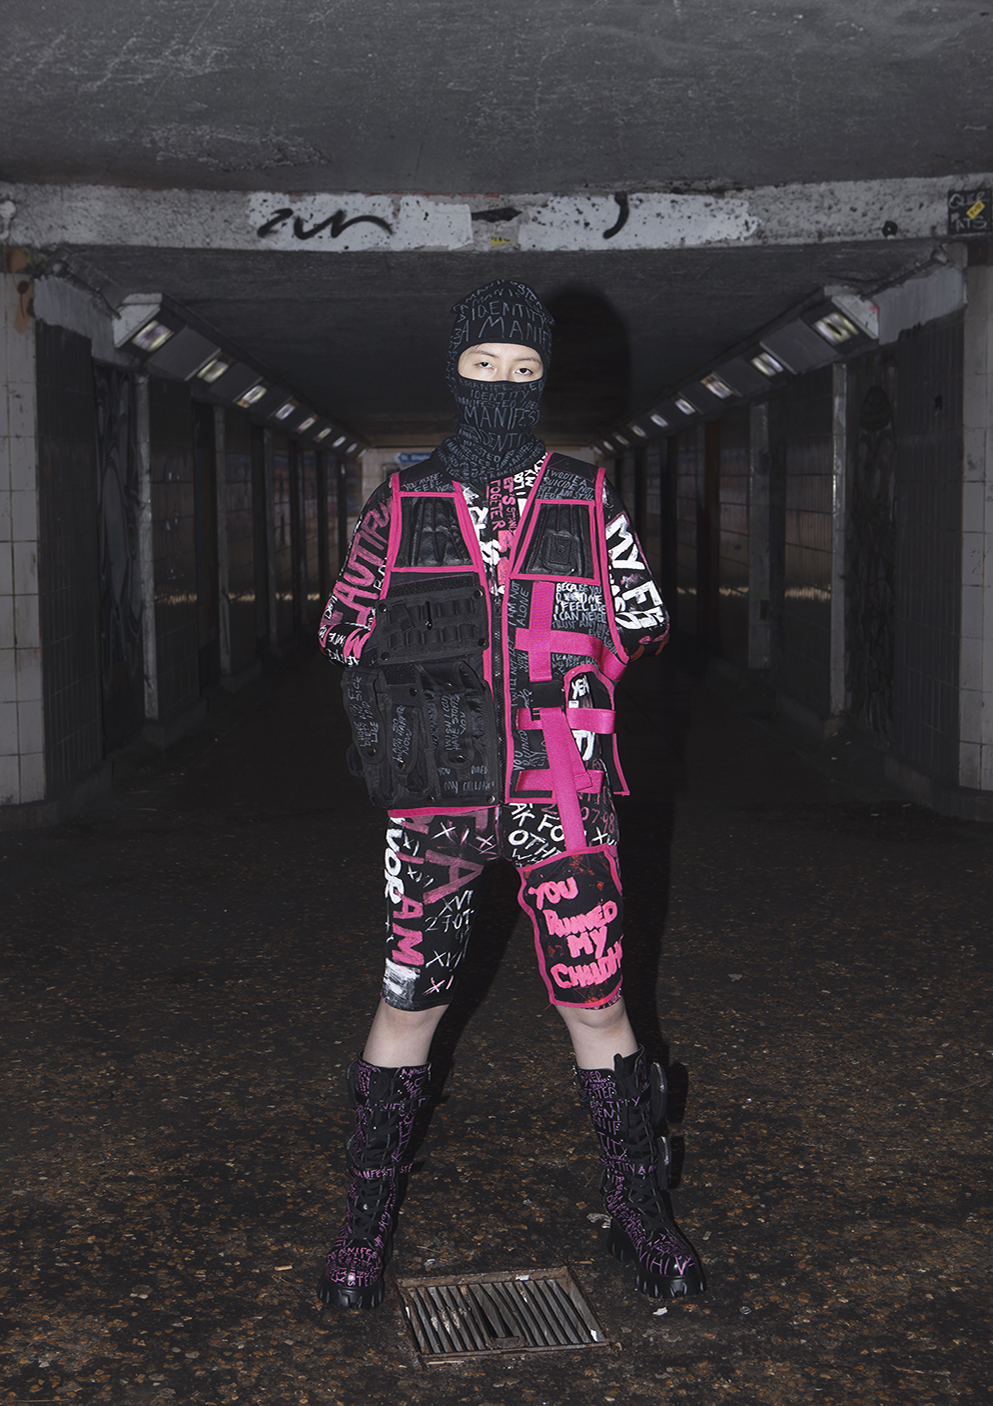 BA Photography work by Maisie McDermott showing a model in black and pink clothing